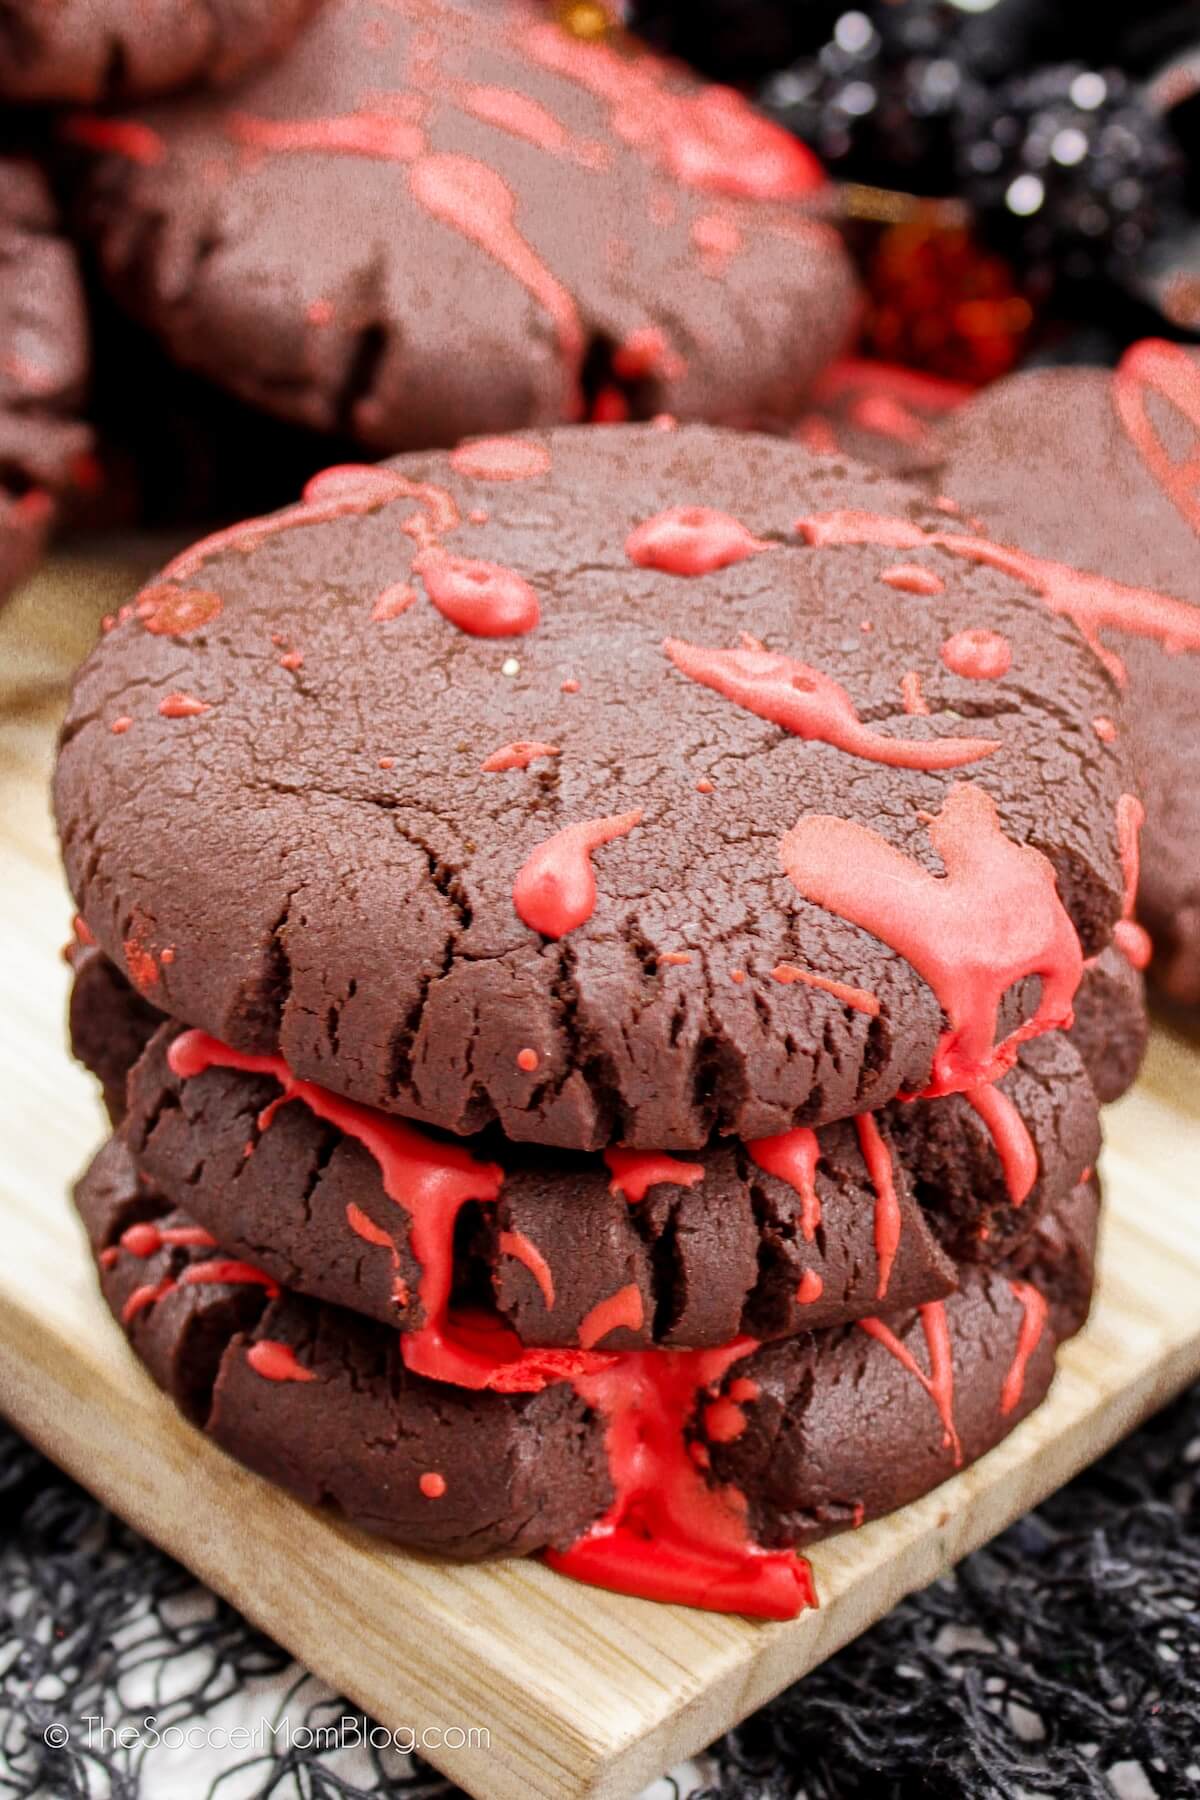 stack of three chocolate cookies with red frosting that looks like blood (for Halloween).